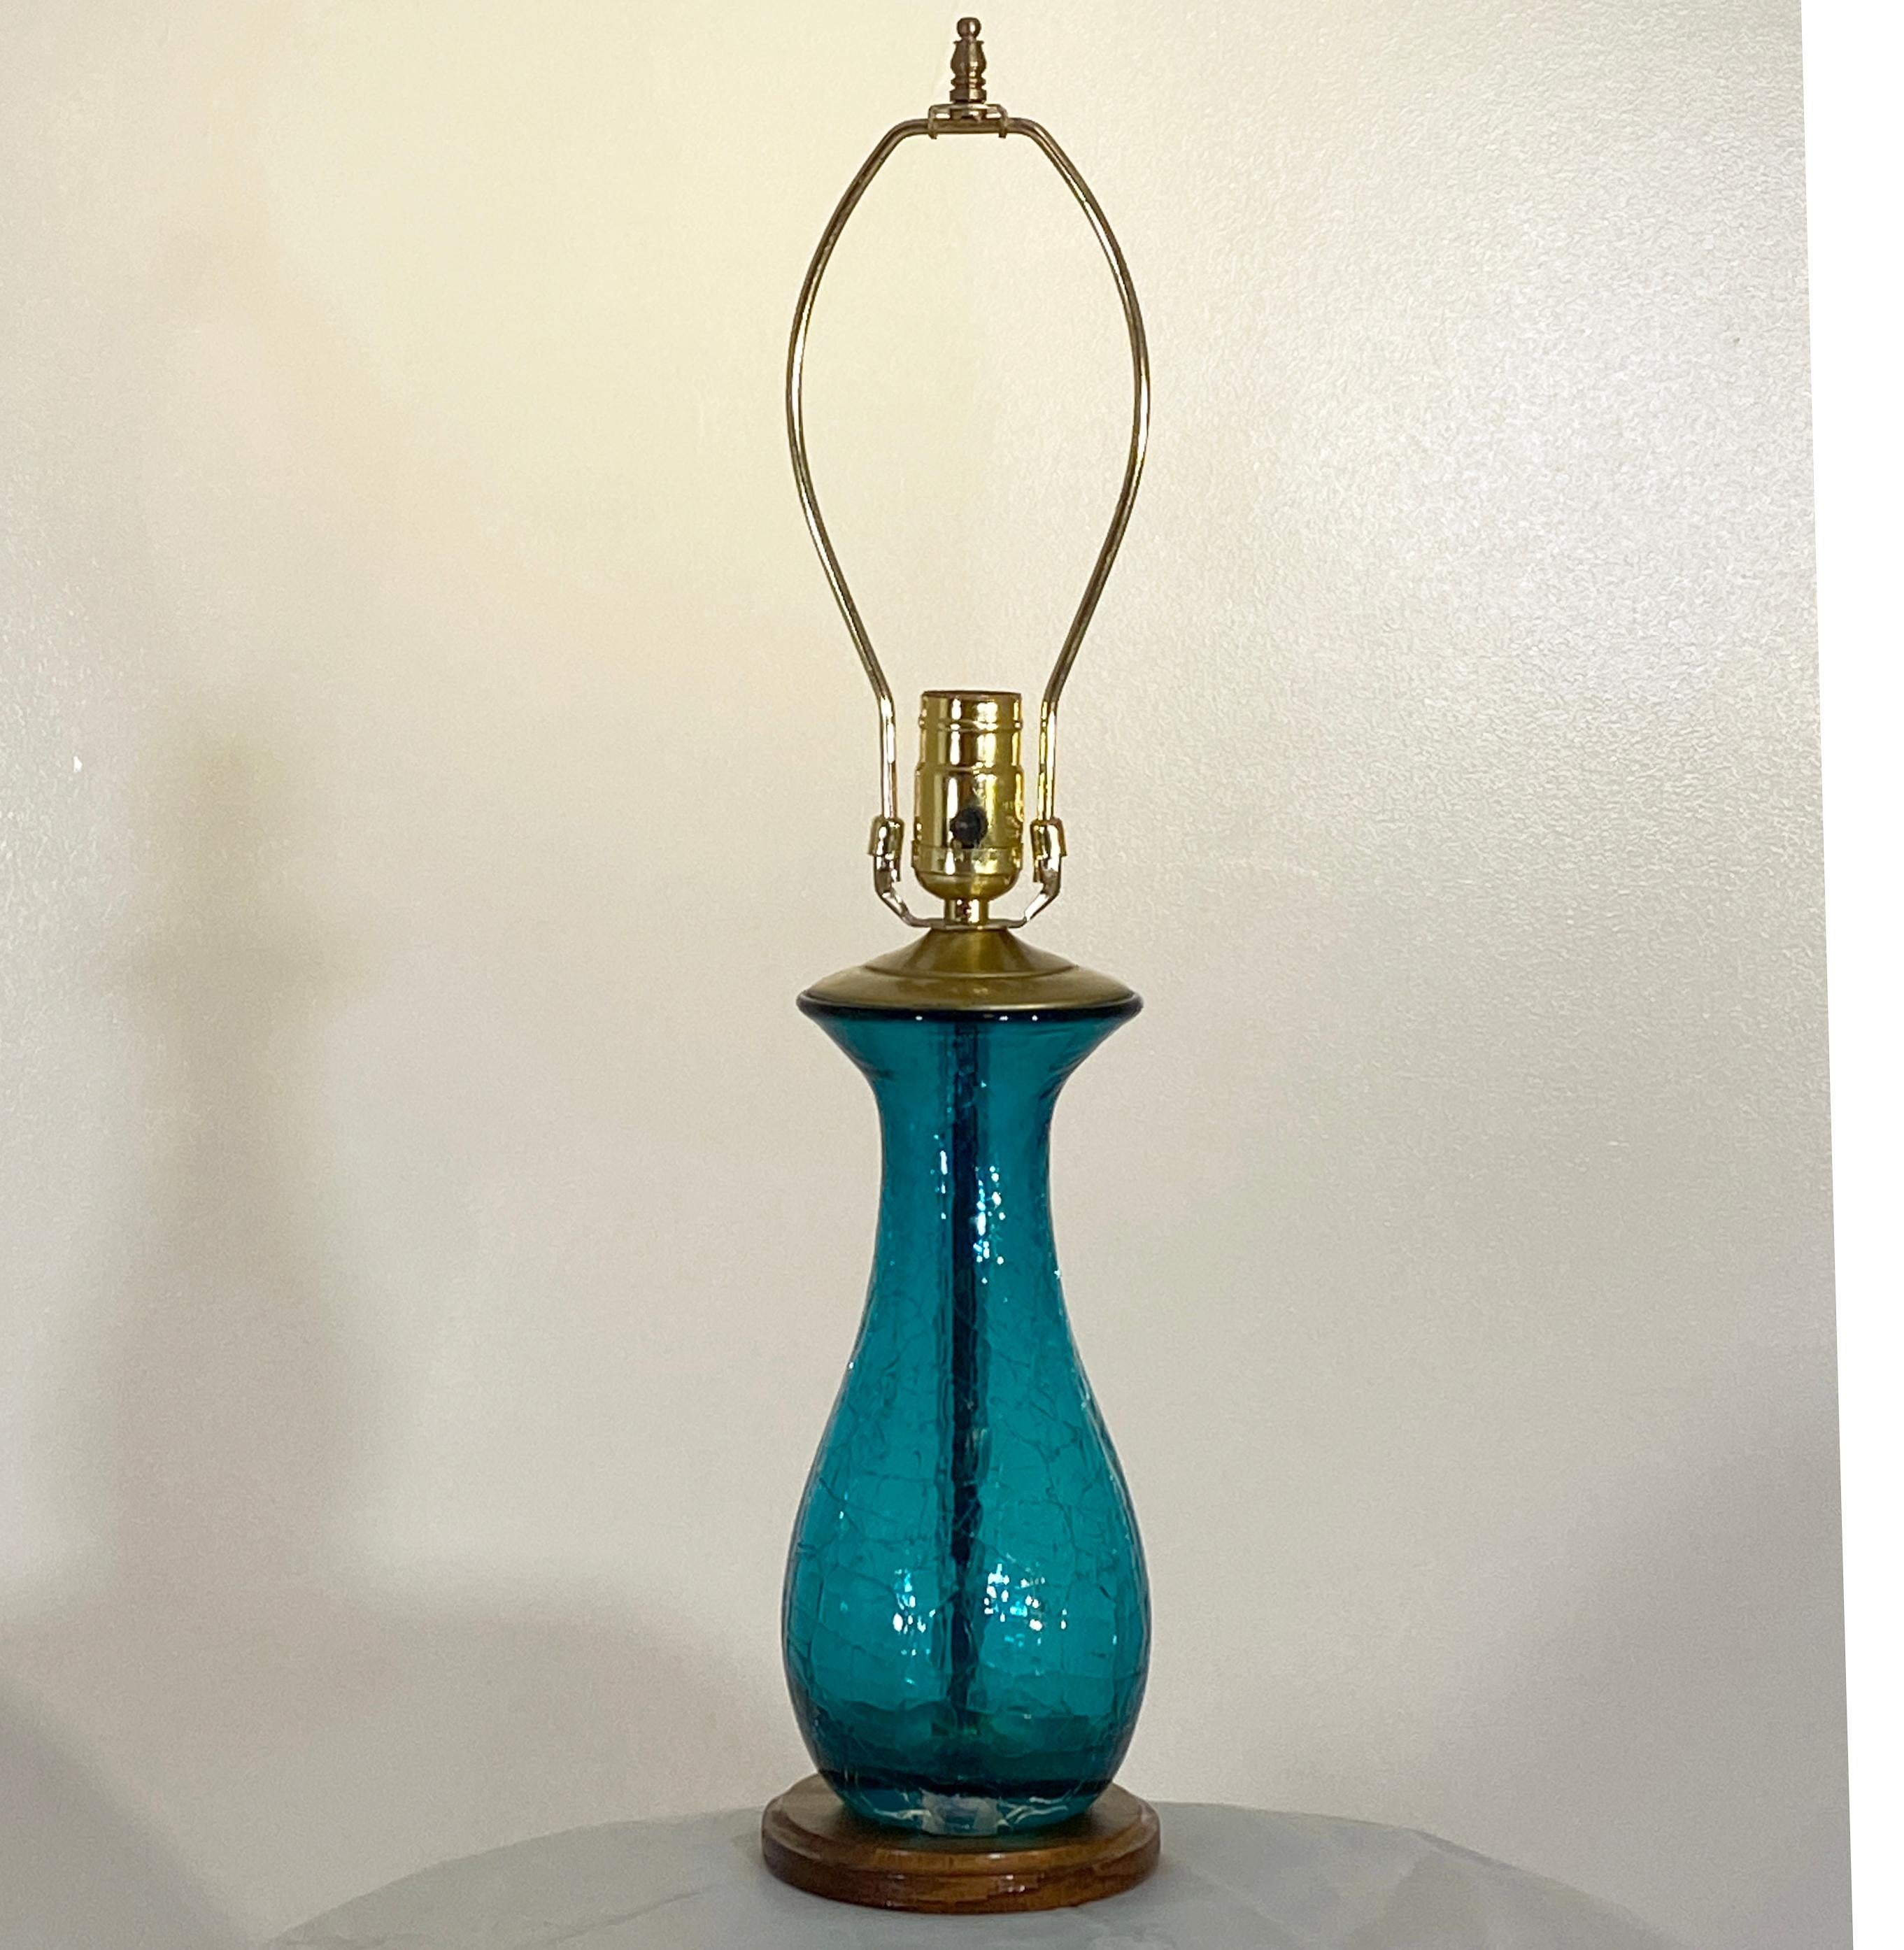 This shape of Blenko has been in the catalog for some time and was reproduced at various times. This however is an uncommon lamp size, diminutive and petite in nature and ideal for a bedroom. It is just 22.5